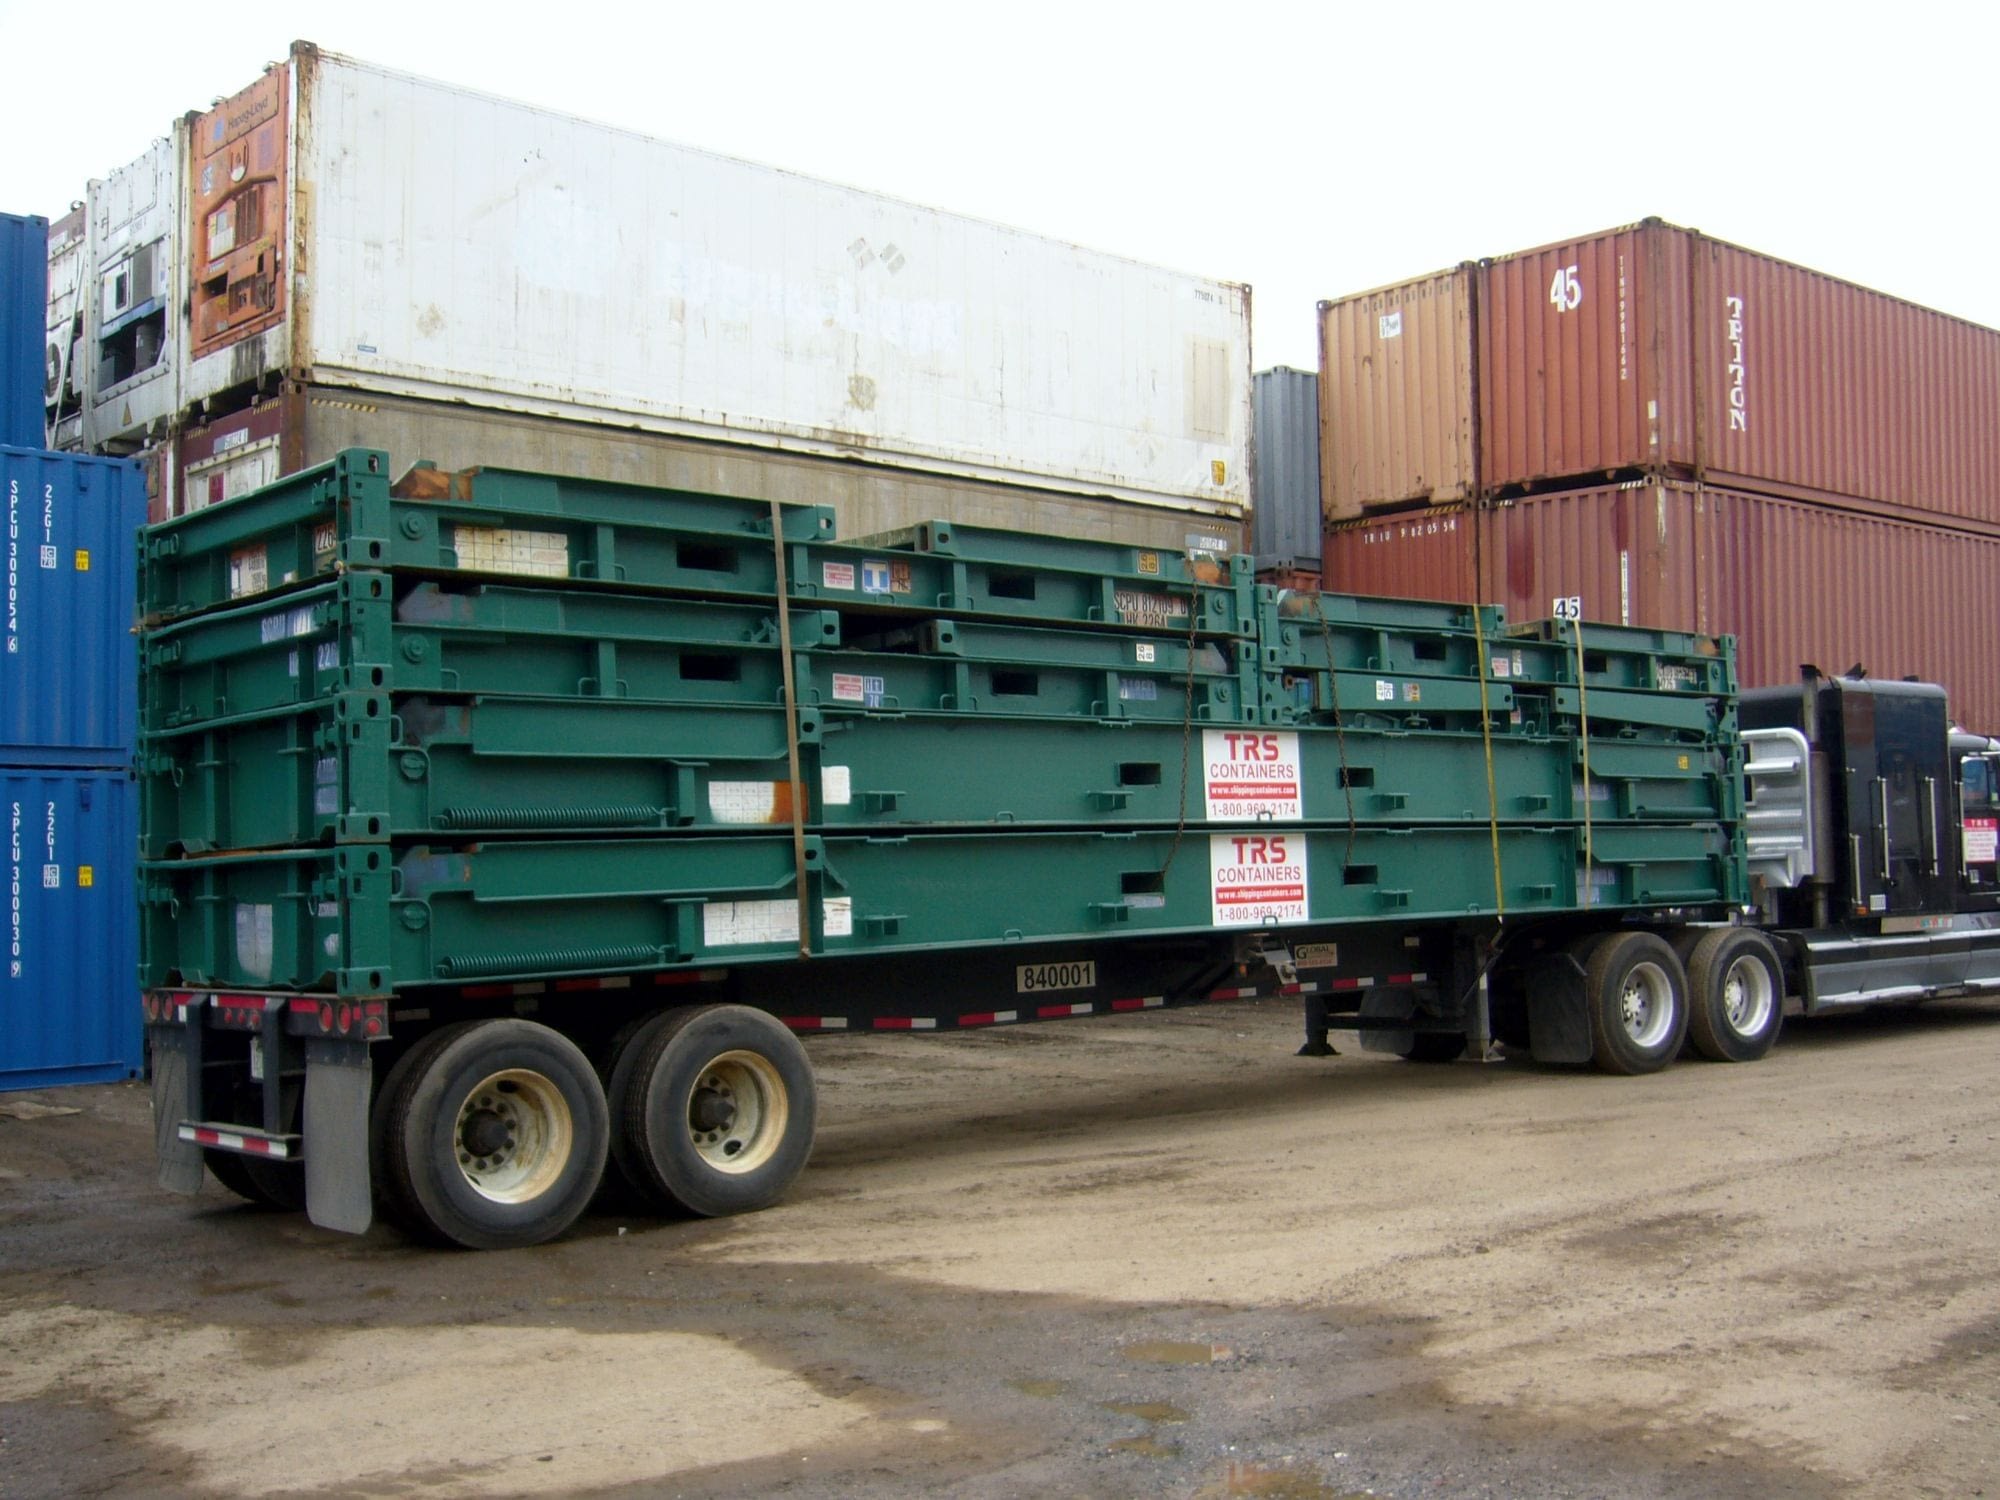 TRS sells and rents flatracks for domestic use and export